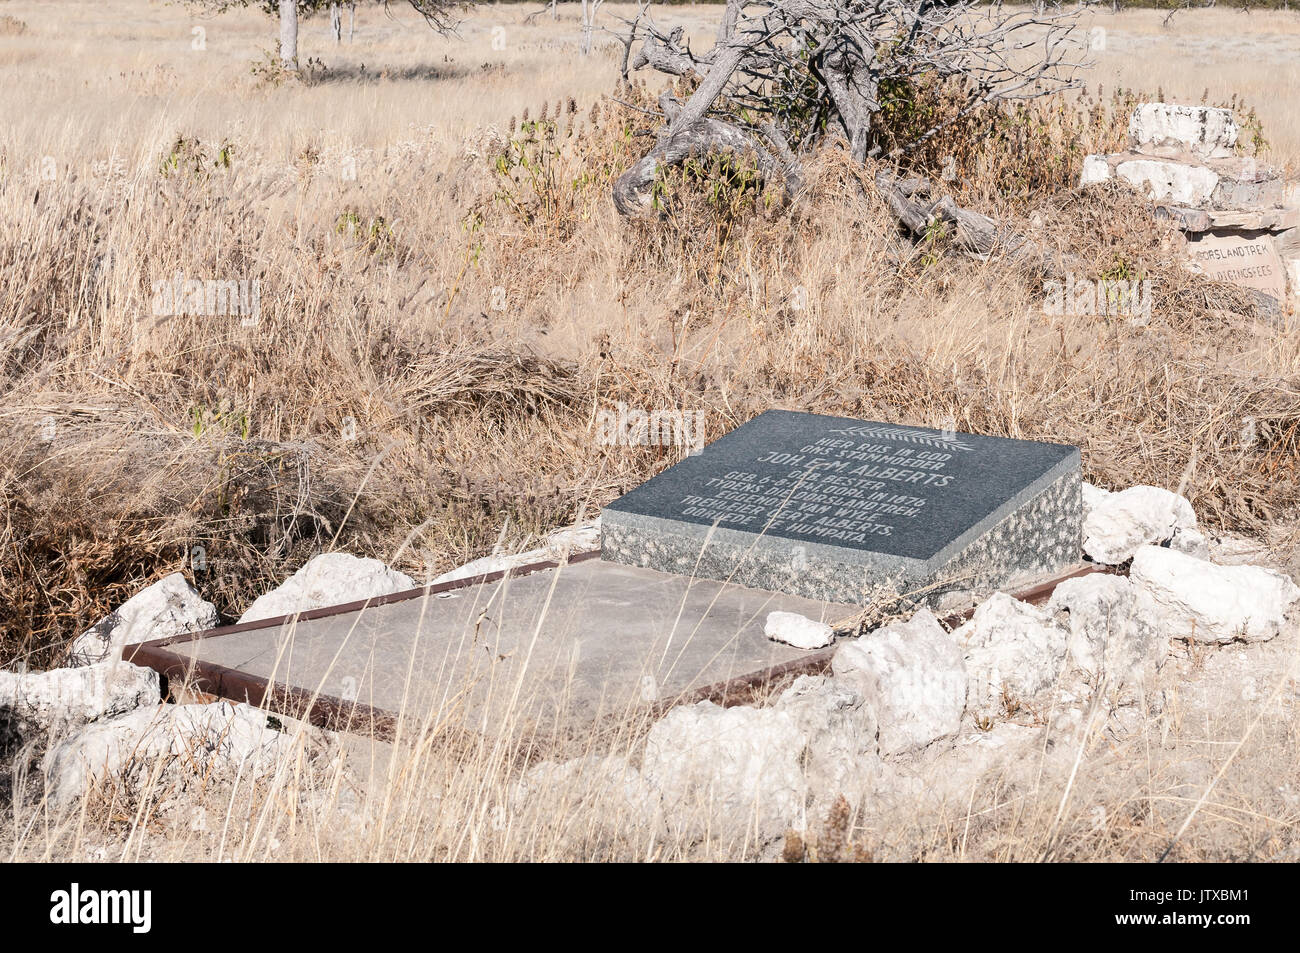 ETOSHA NATIONAL PARK, NAMIBIA - JUNE 22, 2017: Grave at the Rietfontein Waterhole, in the Etosha National Park, of the wife of a leader of the Dorslan Stock Photo